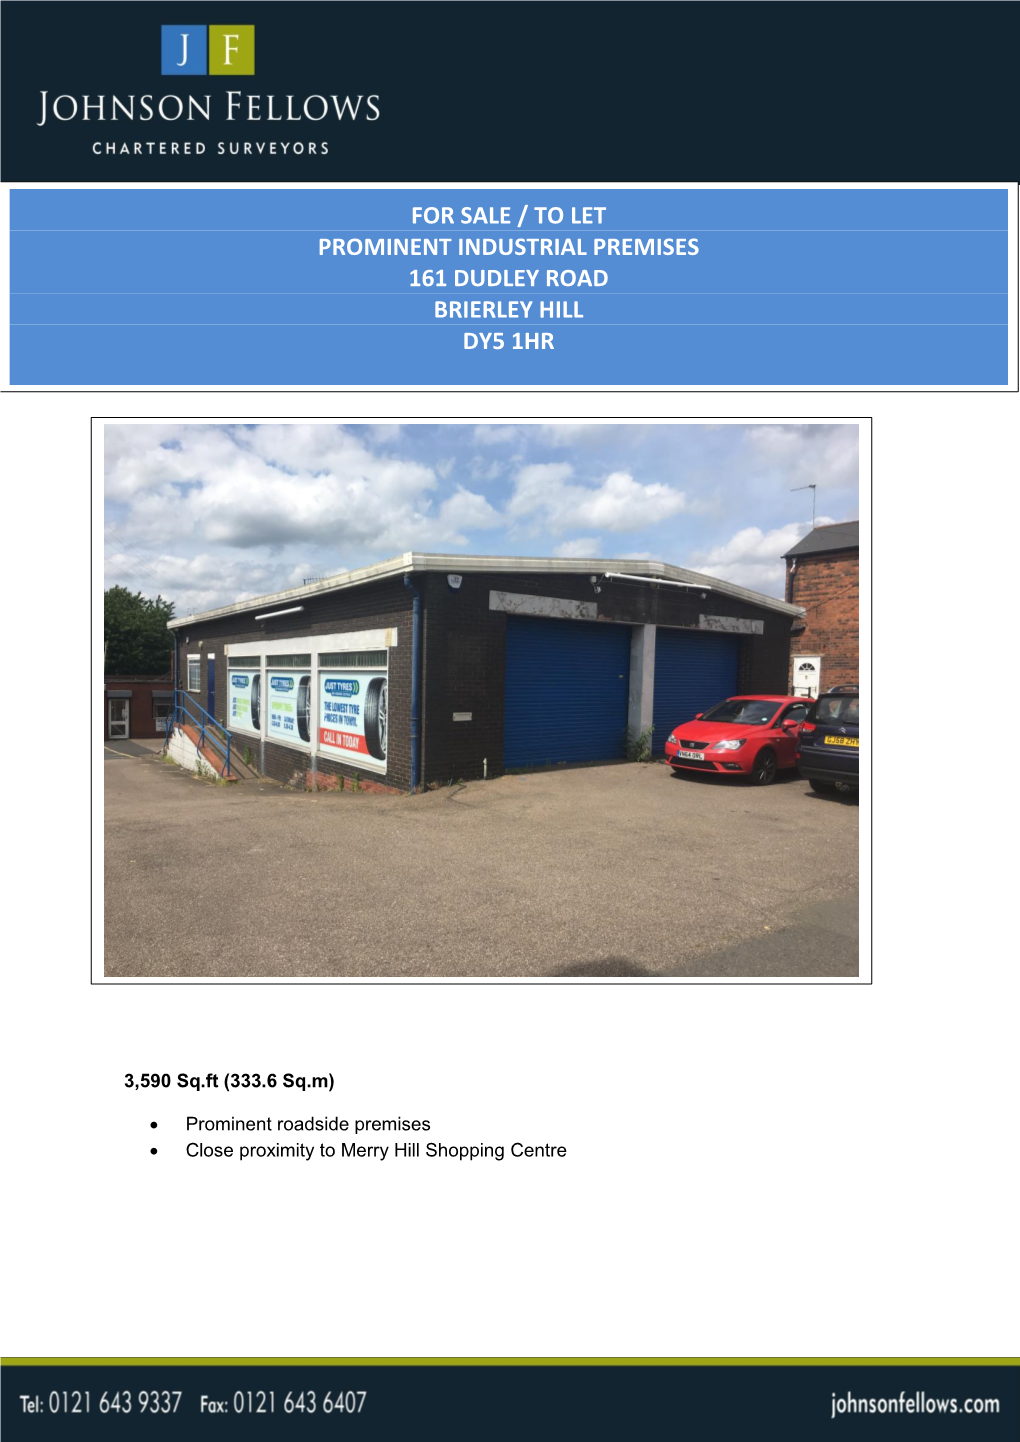 For Sale / to Let Prominent Industrial Premises 161 Dudley Road